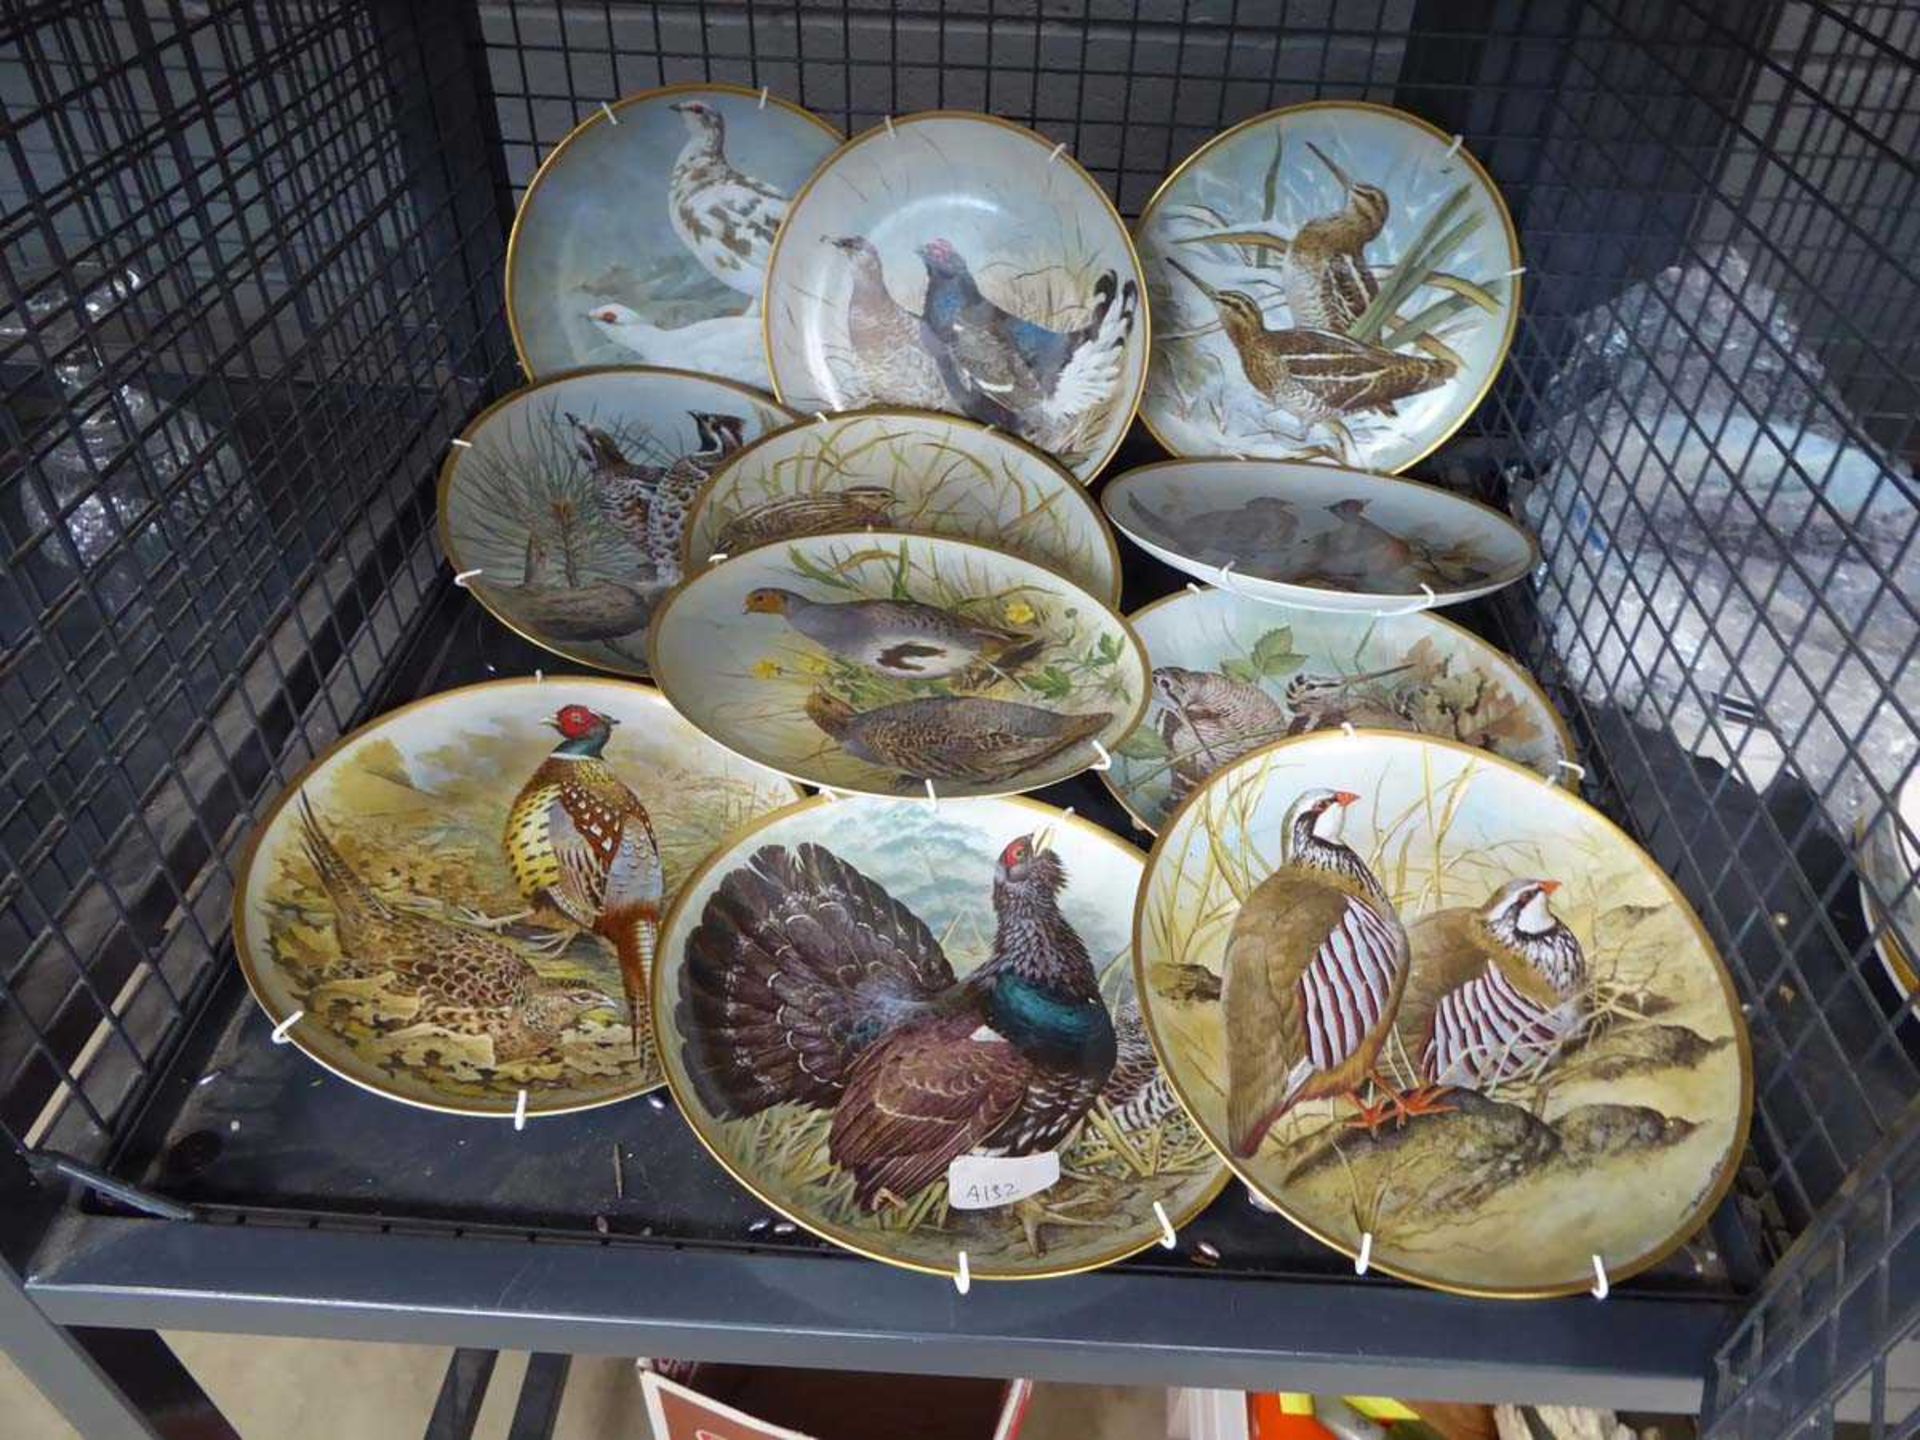 Cage containing gamebird patterned collectors plates